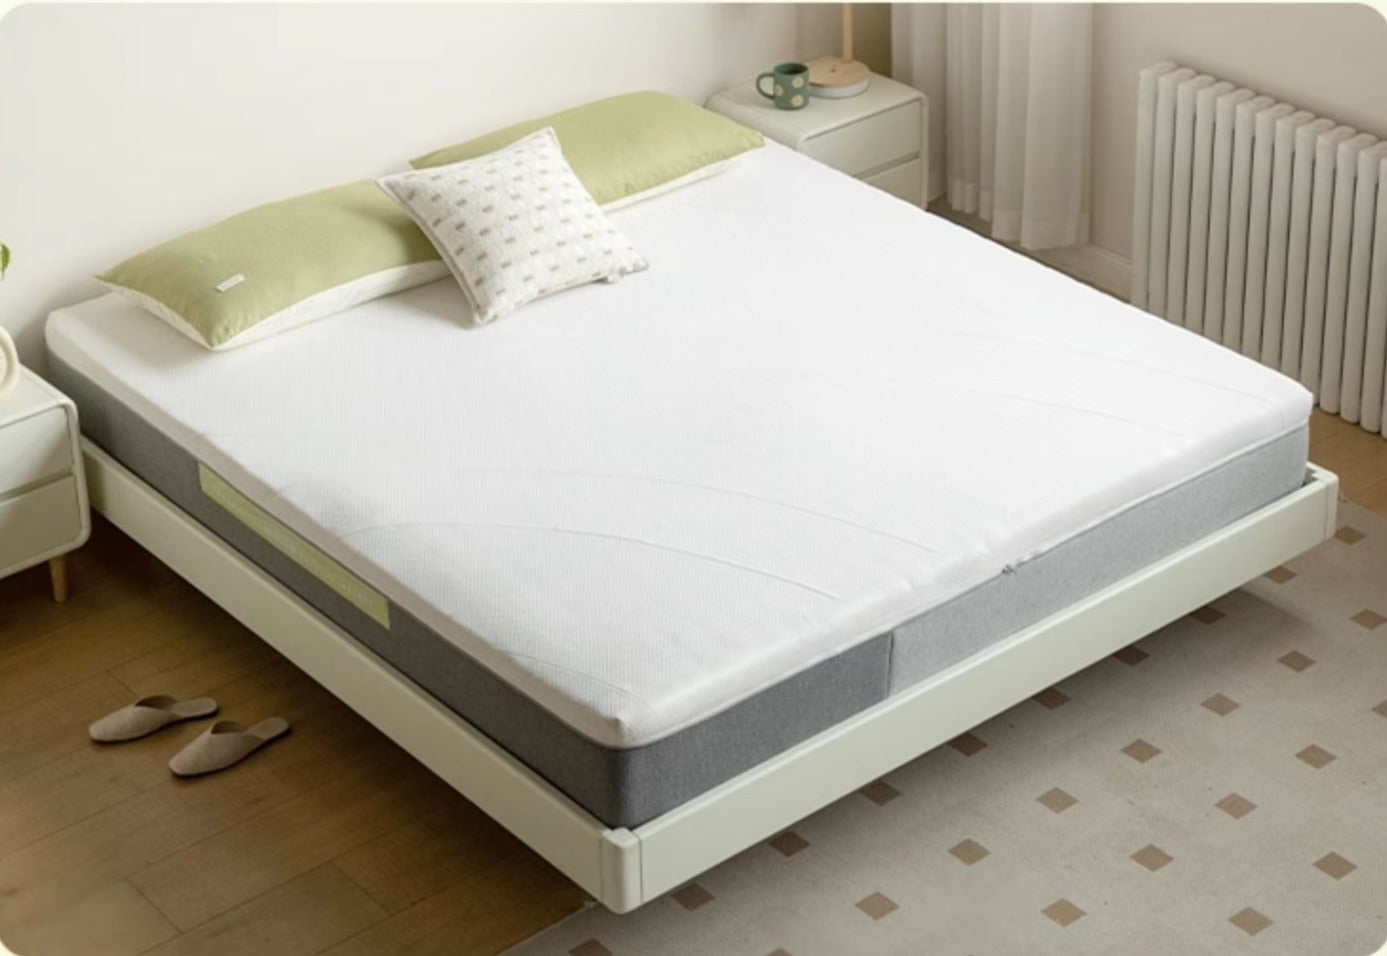 Mattress with Independent Power Sponge and Three-Zone Spring Support Simmons Pad